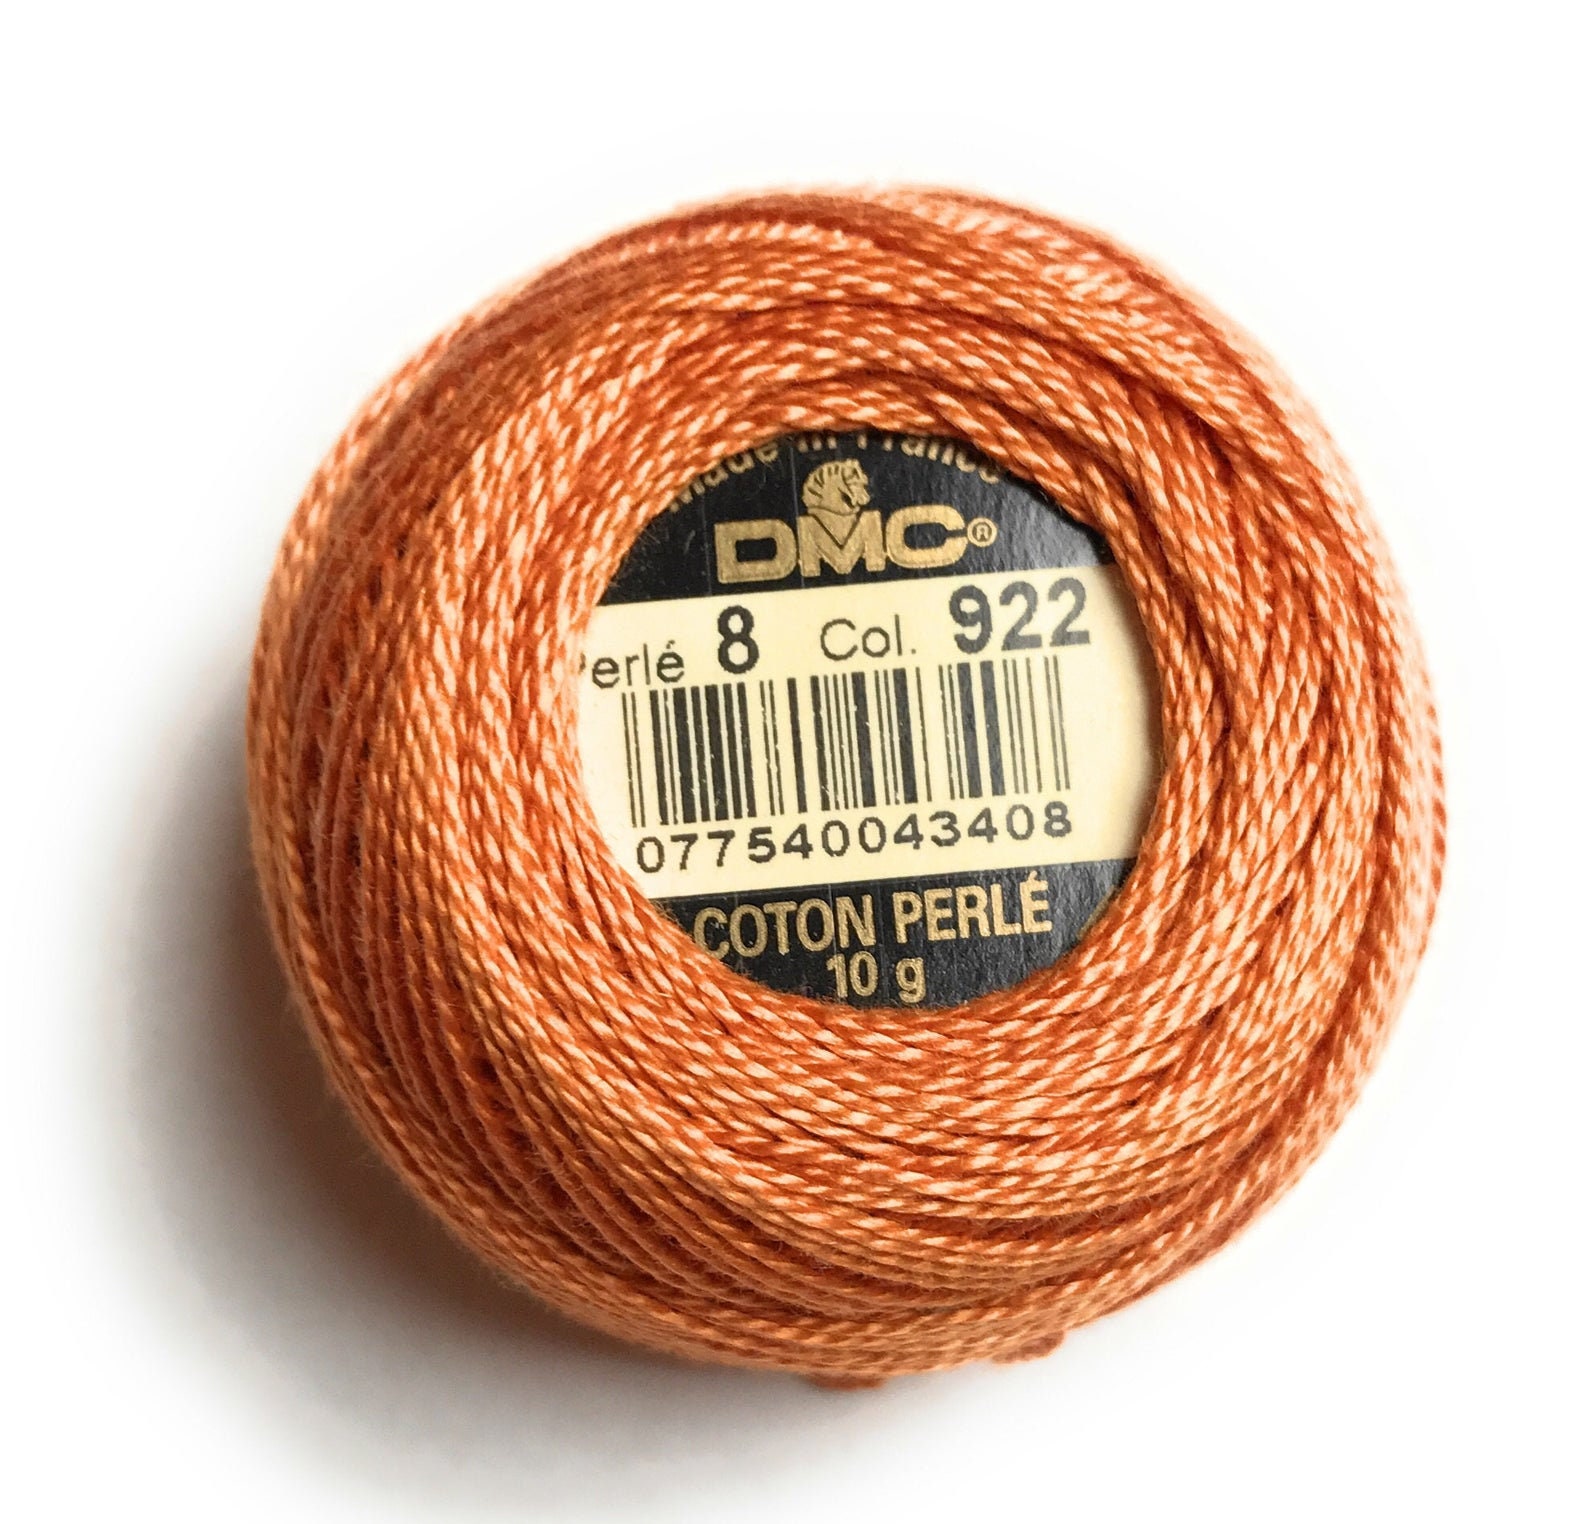 DMC Pearl Cotton Balls Article 116 Size 8 Embroidery Floss by DMC